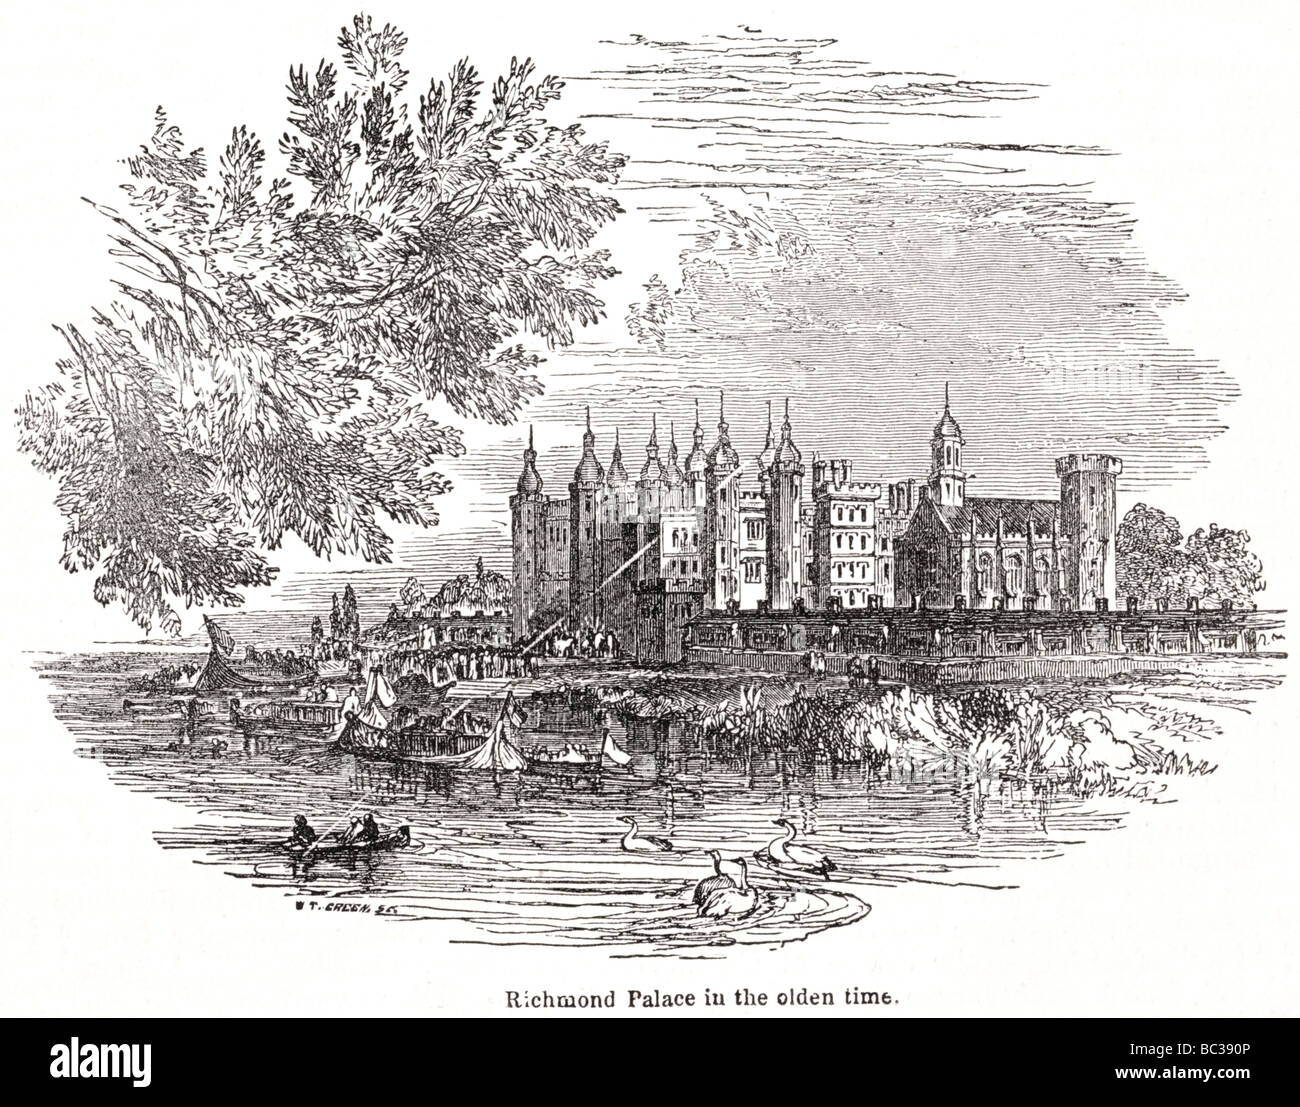 richmond palace in the olden time Stock Photo